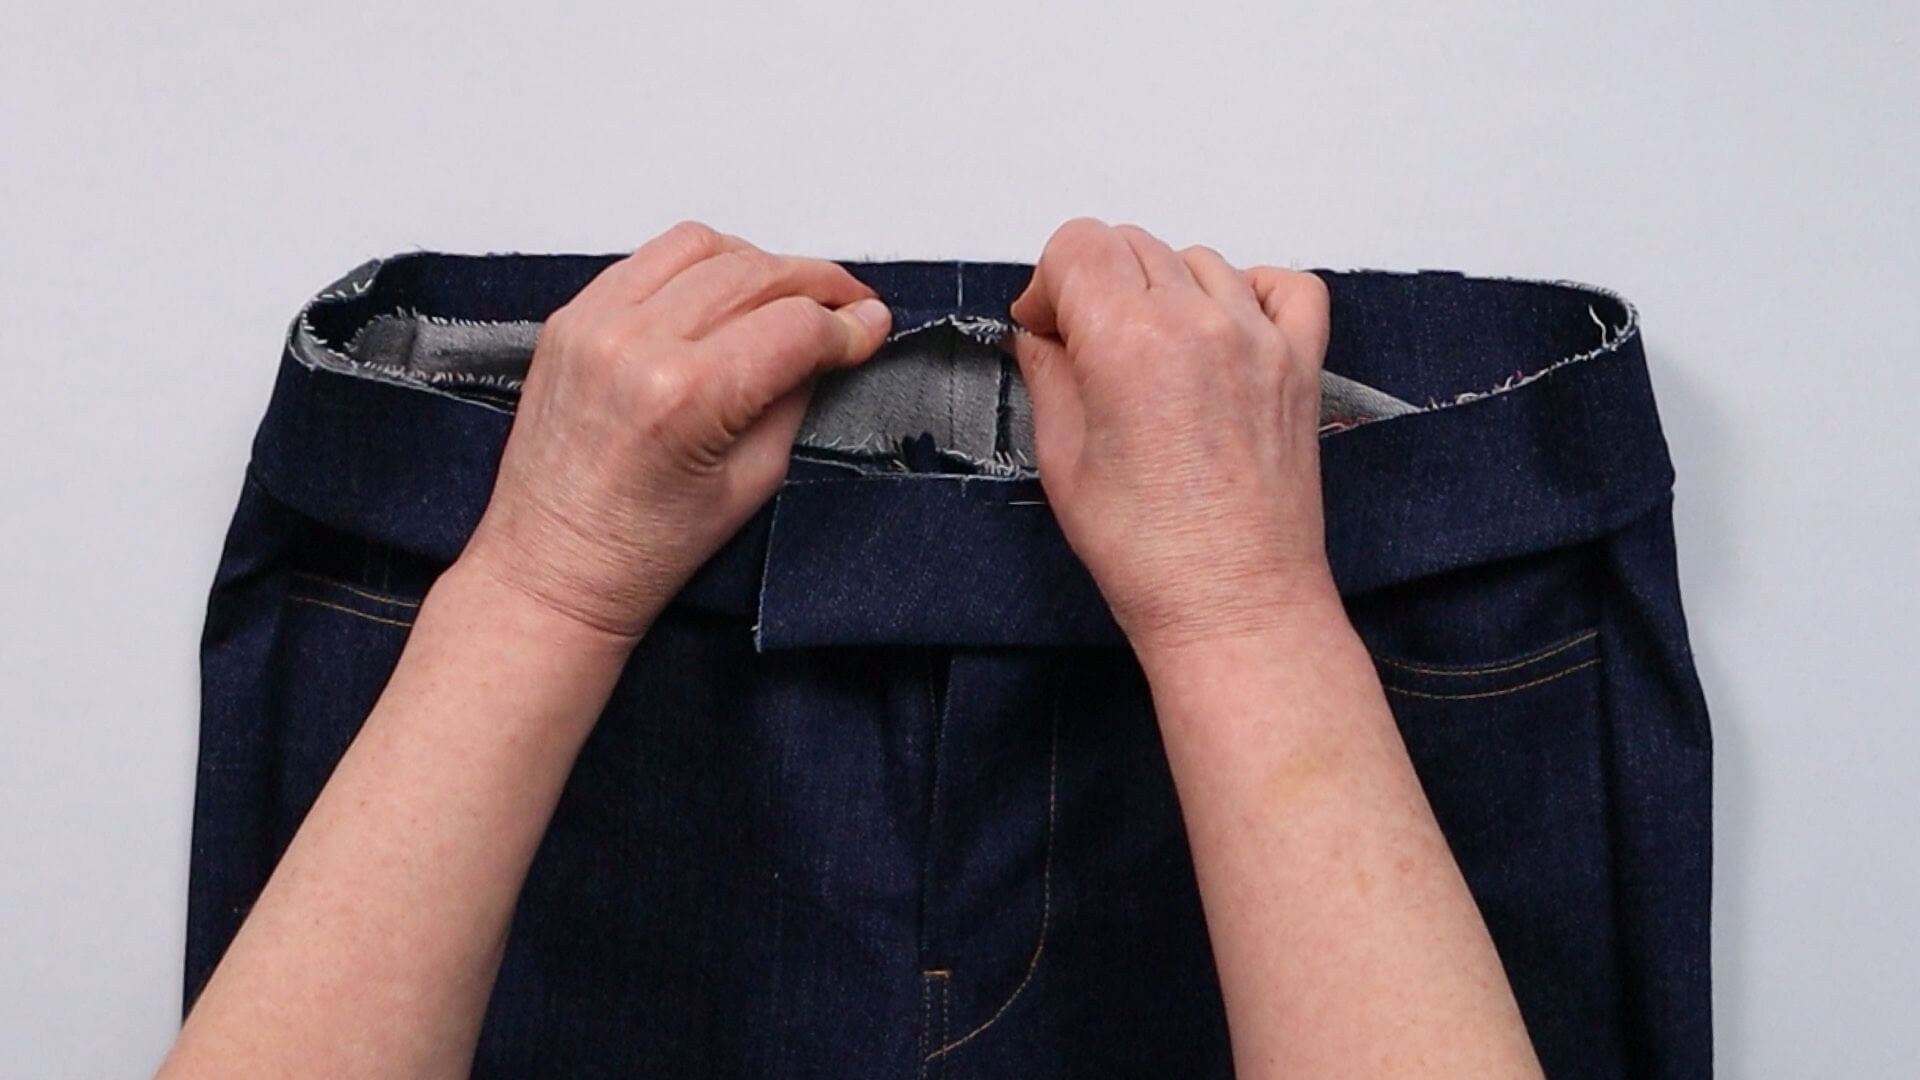 smartPATTERN sewing instructions for preparing a pair of jeans for fitting - pin the waistband to the center back with a clip